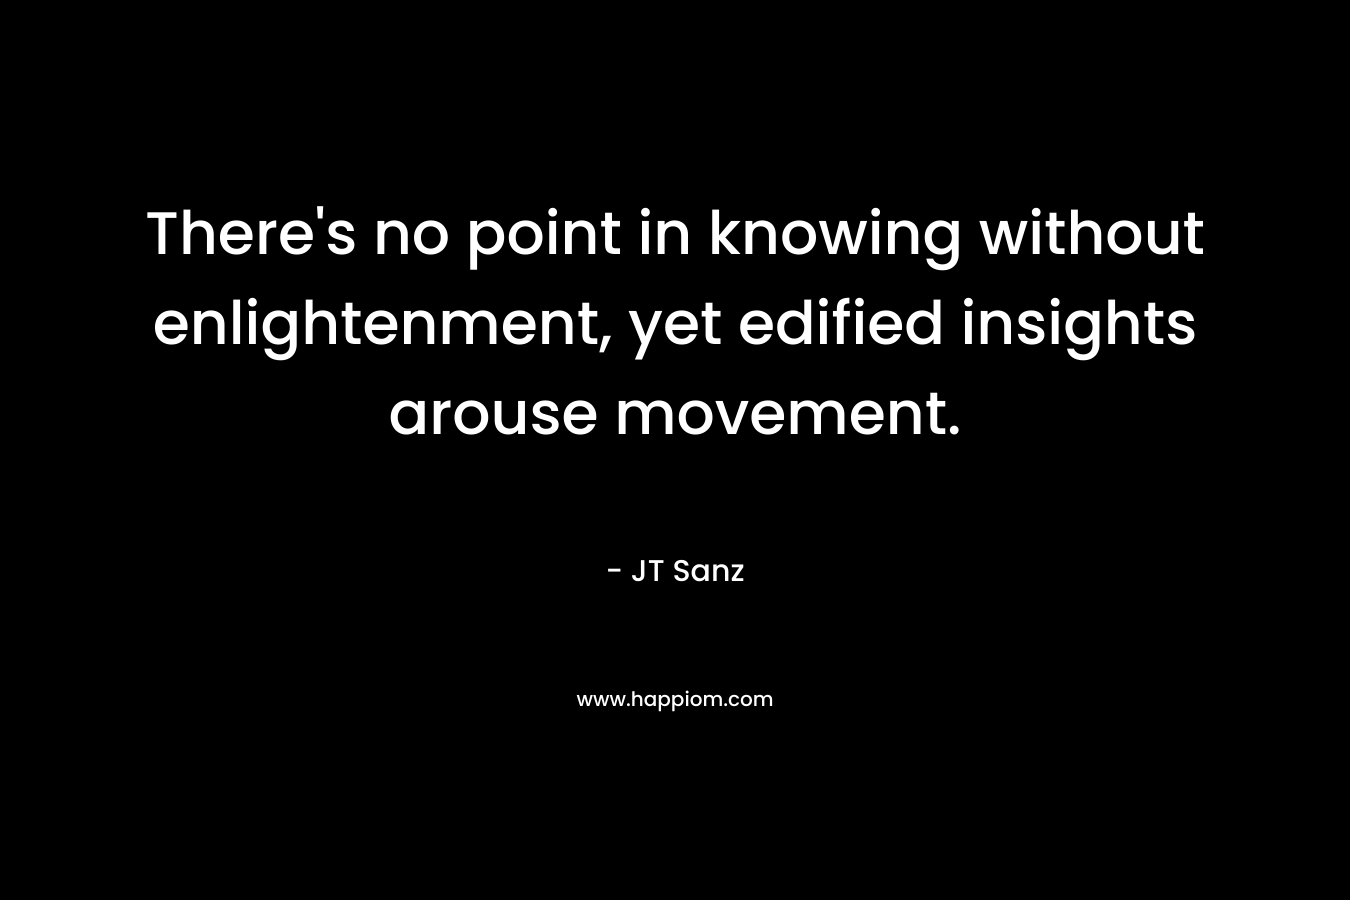 There’s no point in knowing without enlightenment, yet edified insights arouse movement. – JT Sanz